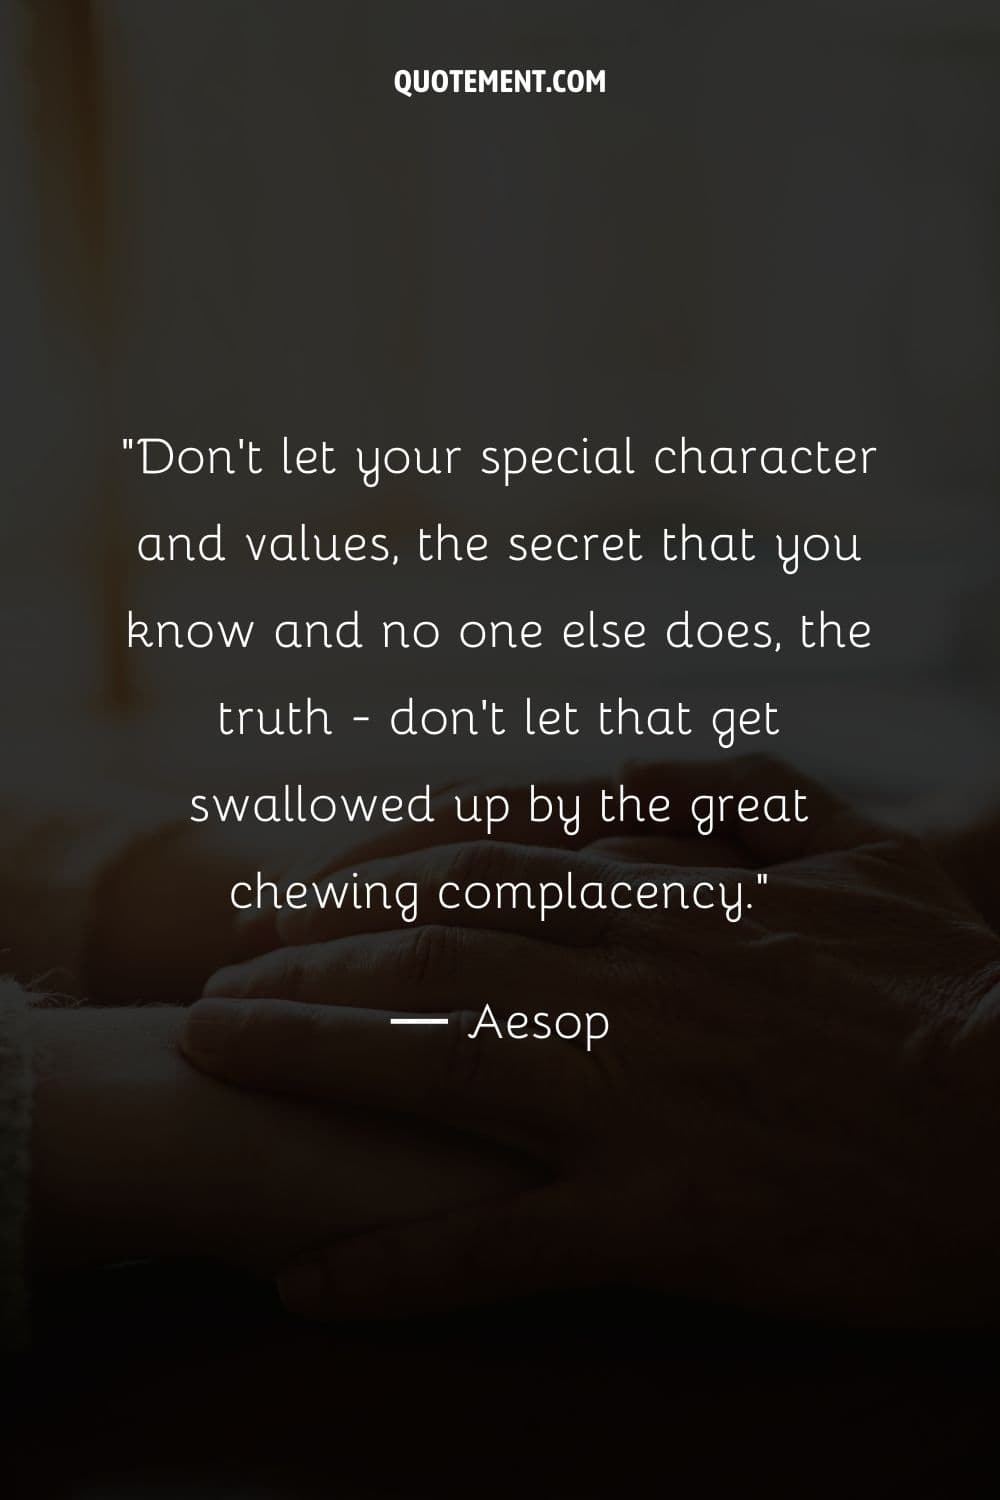 Don't let your special character and values, the secret that you know and no one else does